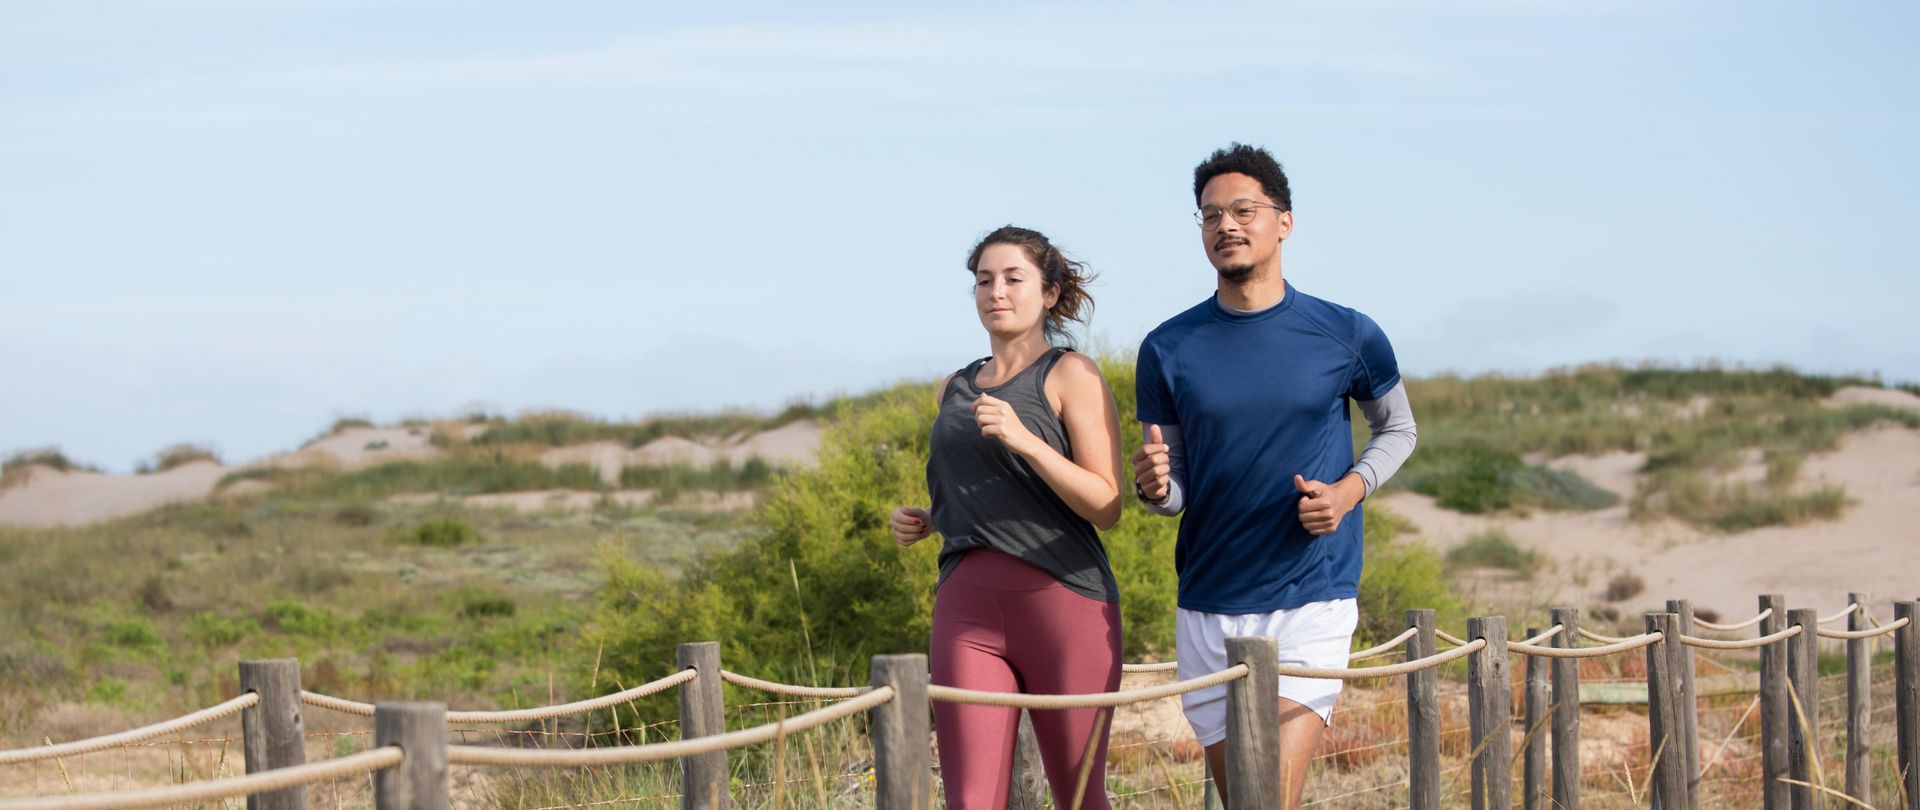 man and woman jogging outside